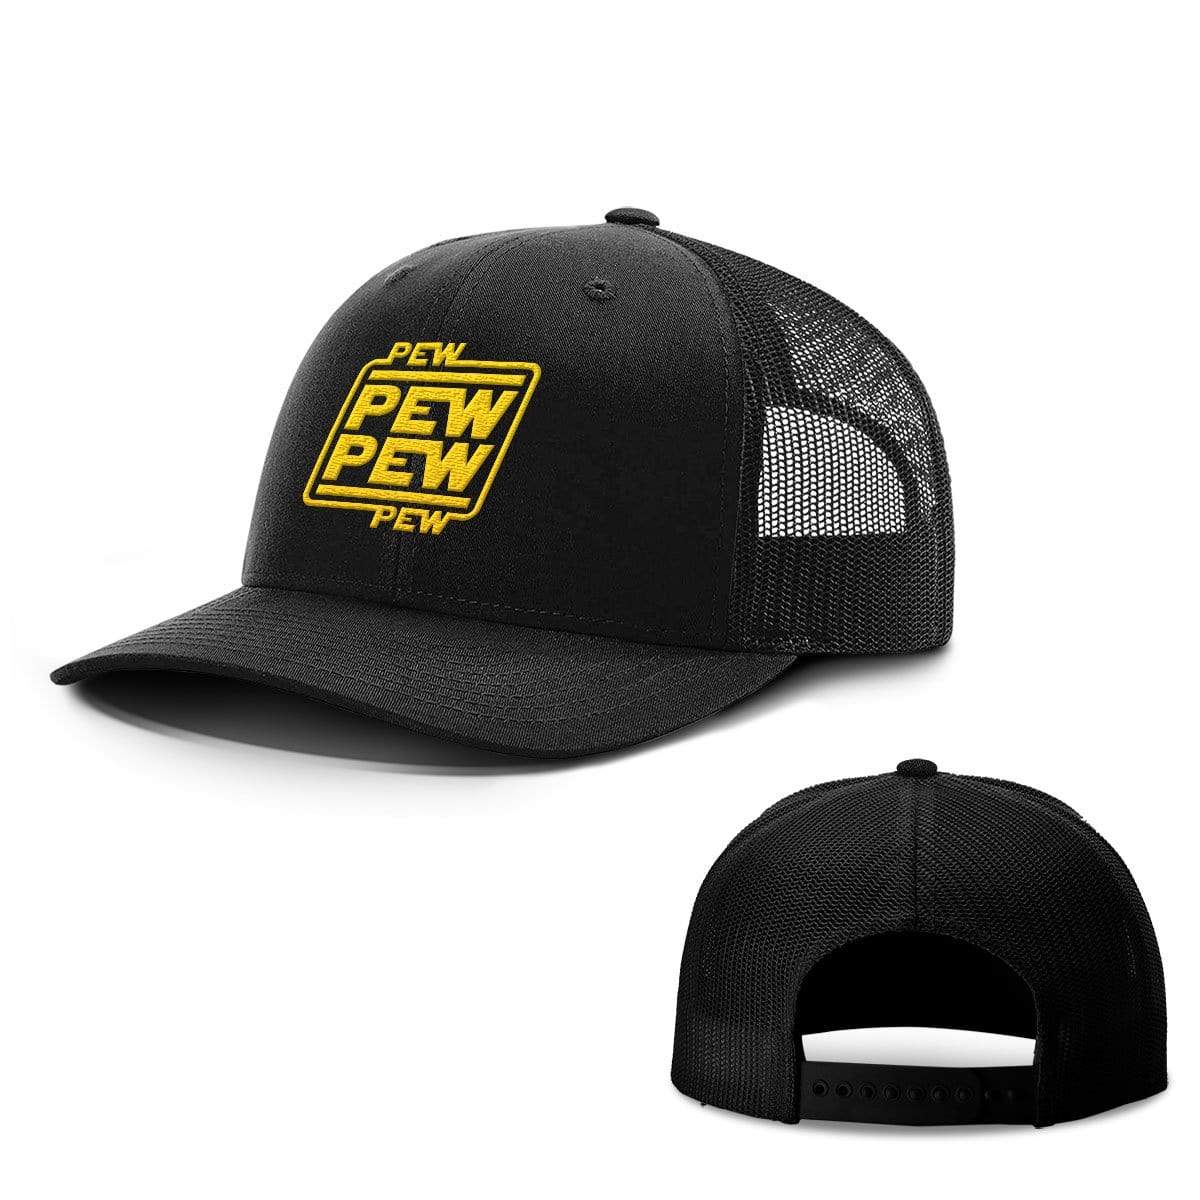 BustedTees.com Snapback / Full Black / One Size Pew Pew Hats